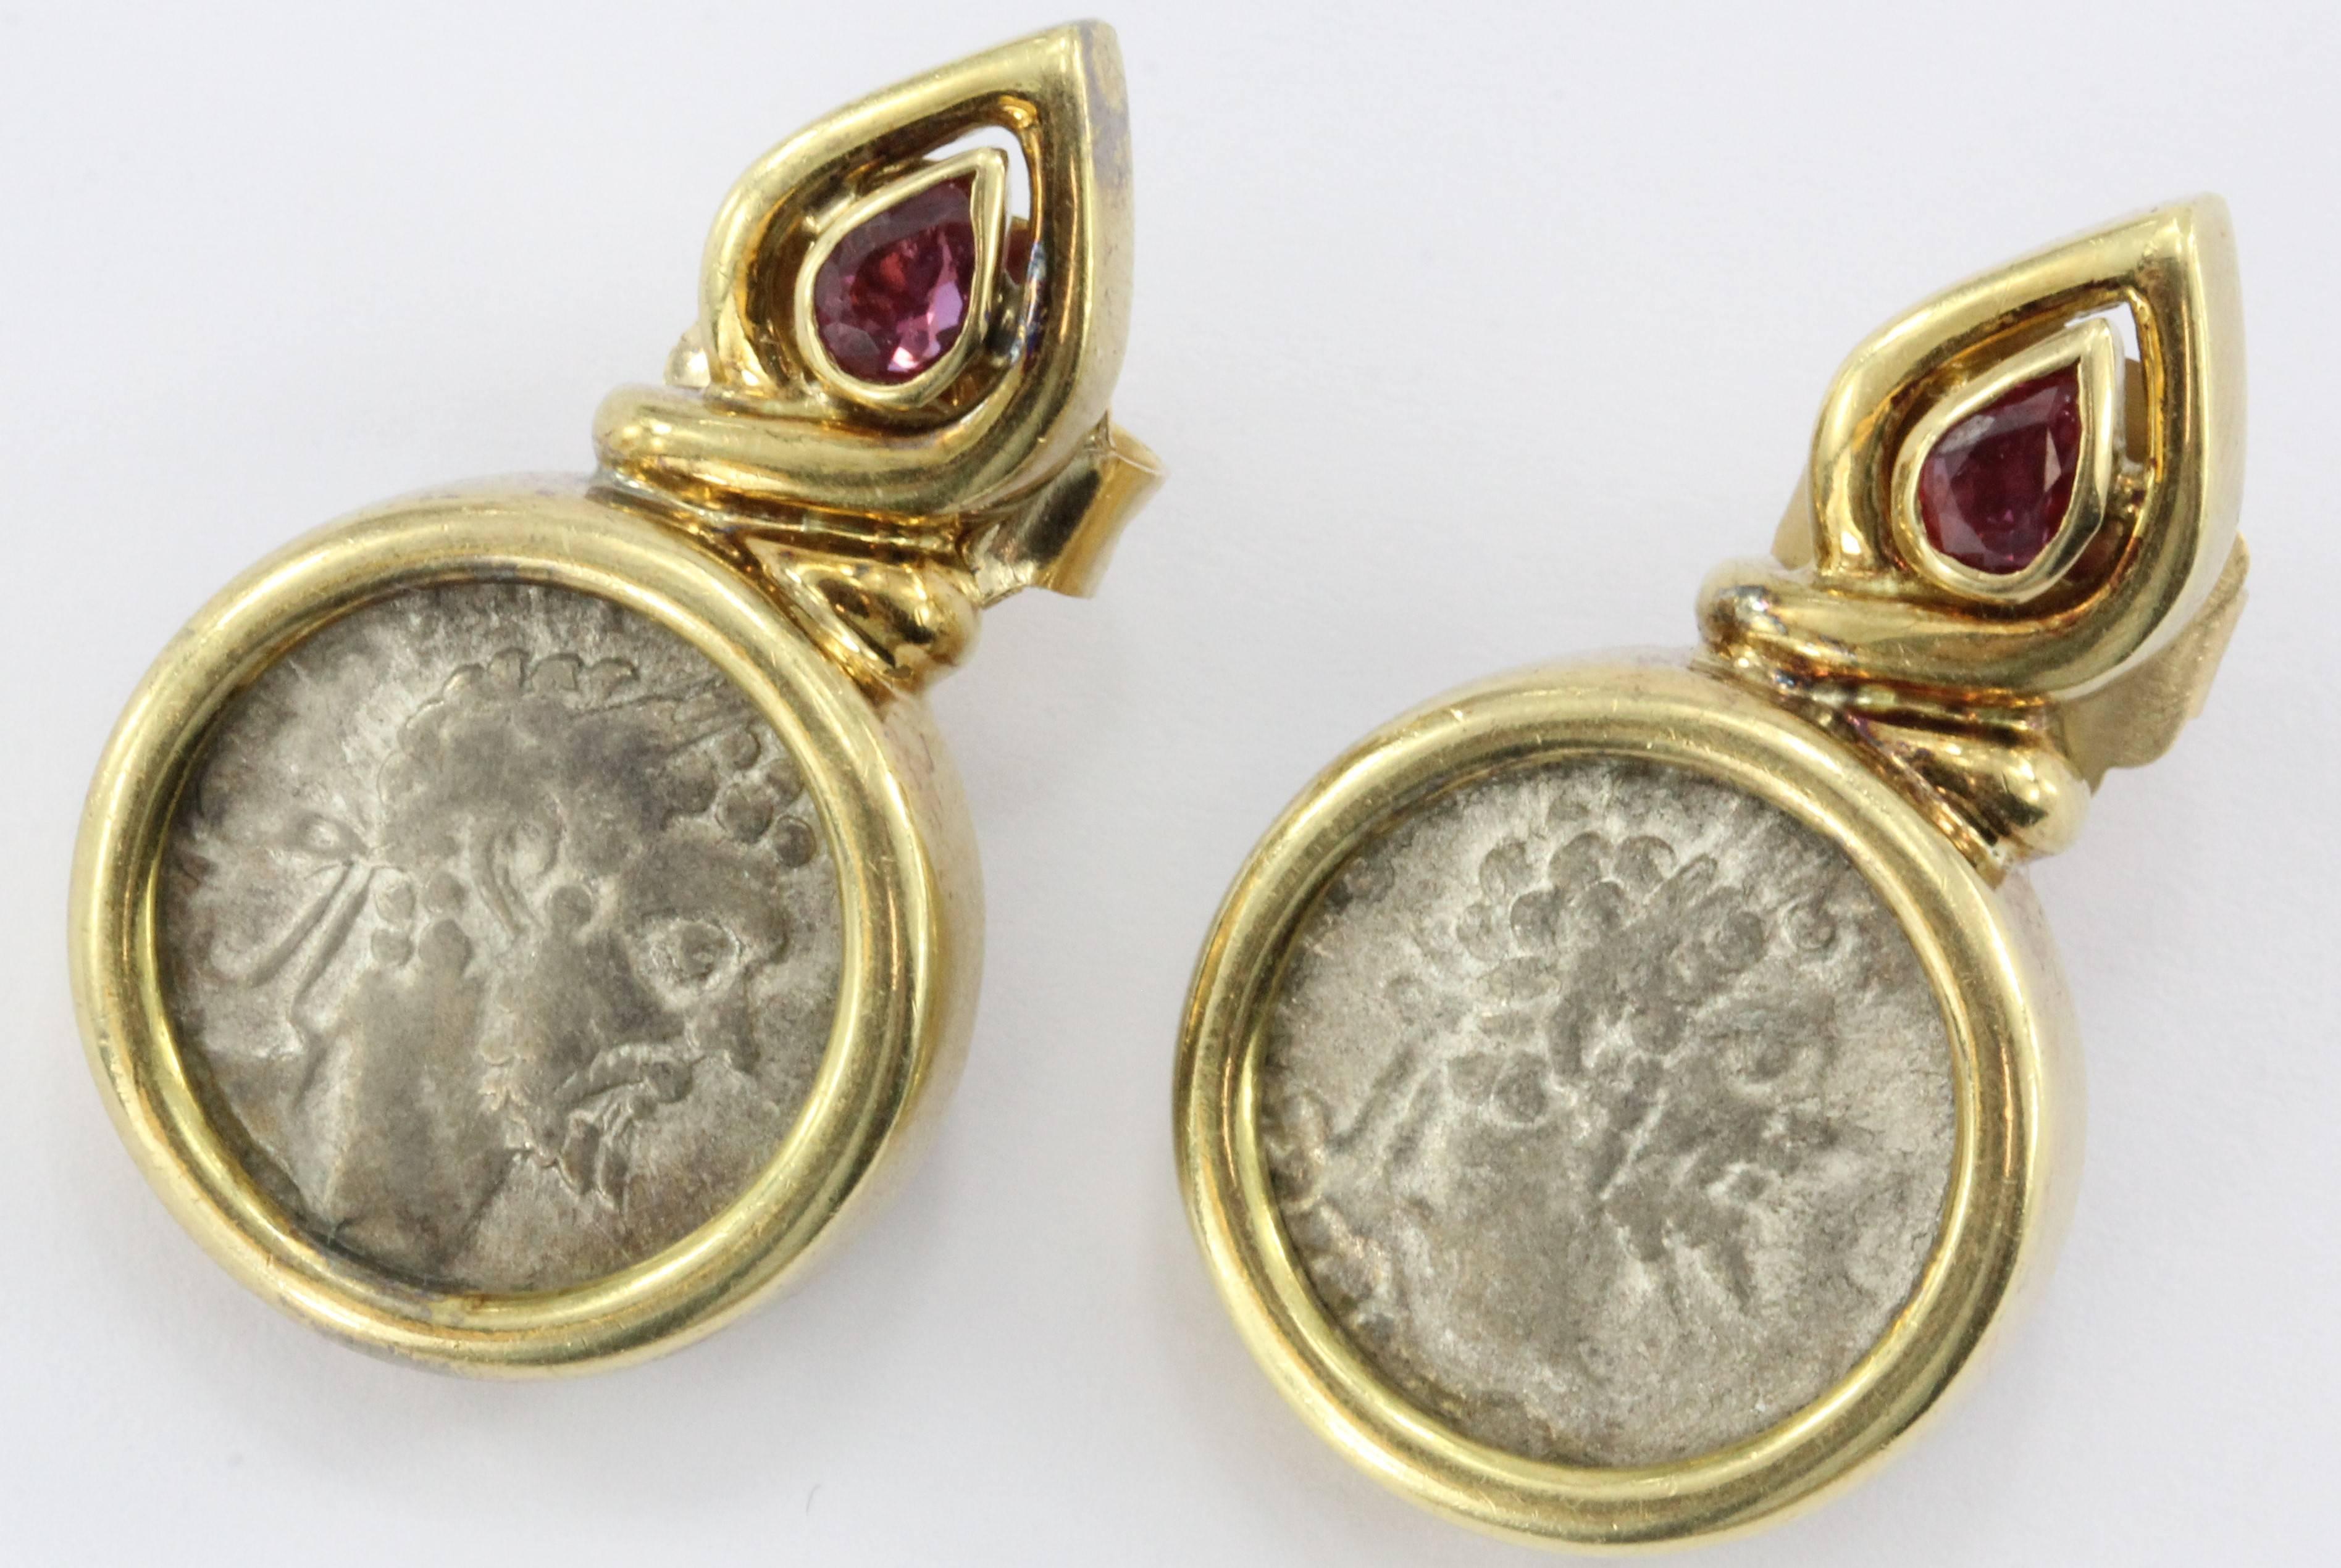 18K Gold & Ruby Roman Silver Denarius Coin Earrings. The earrings are in excellent estate condition and ready to wear. The earring backs are mismatched though. One is a replacement 14K gold back and the other is an original 18K back. The earrings